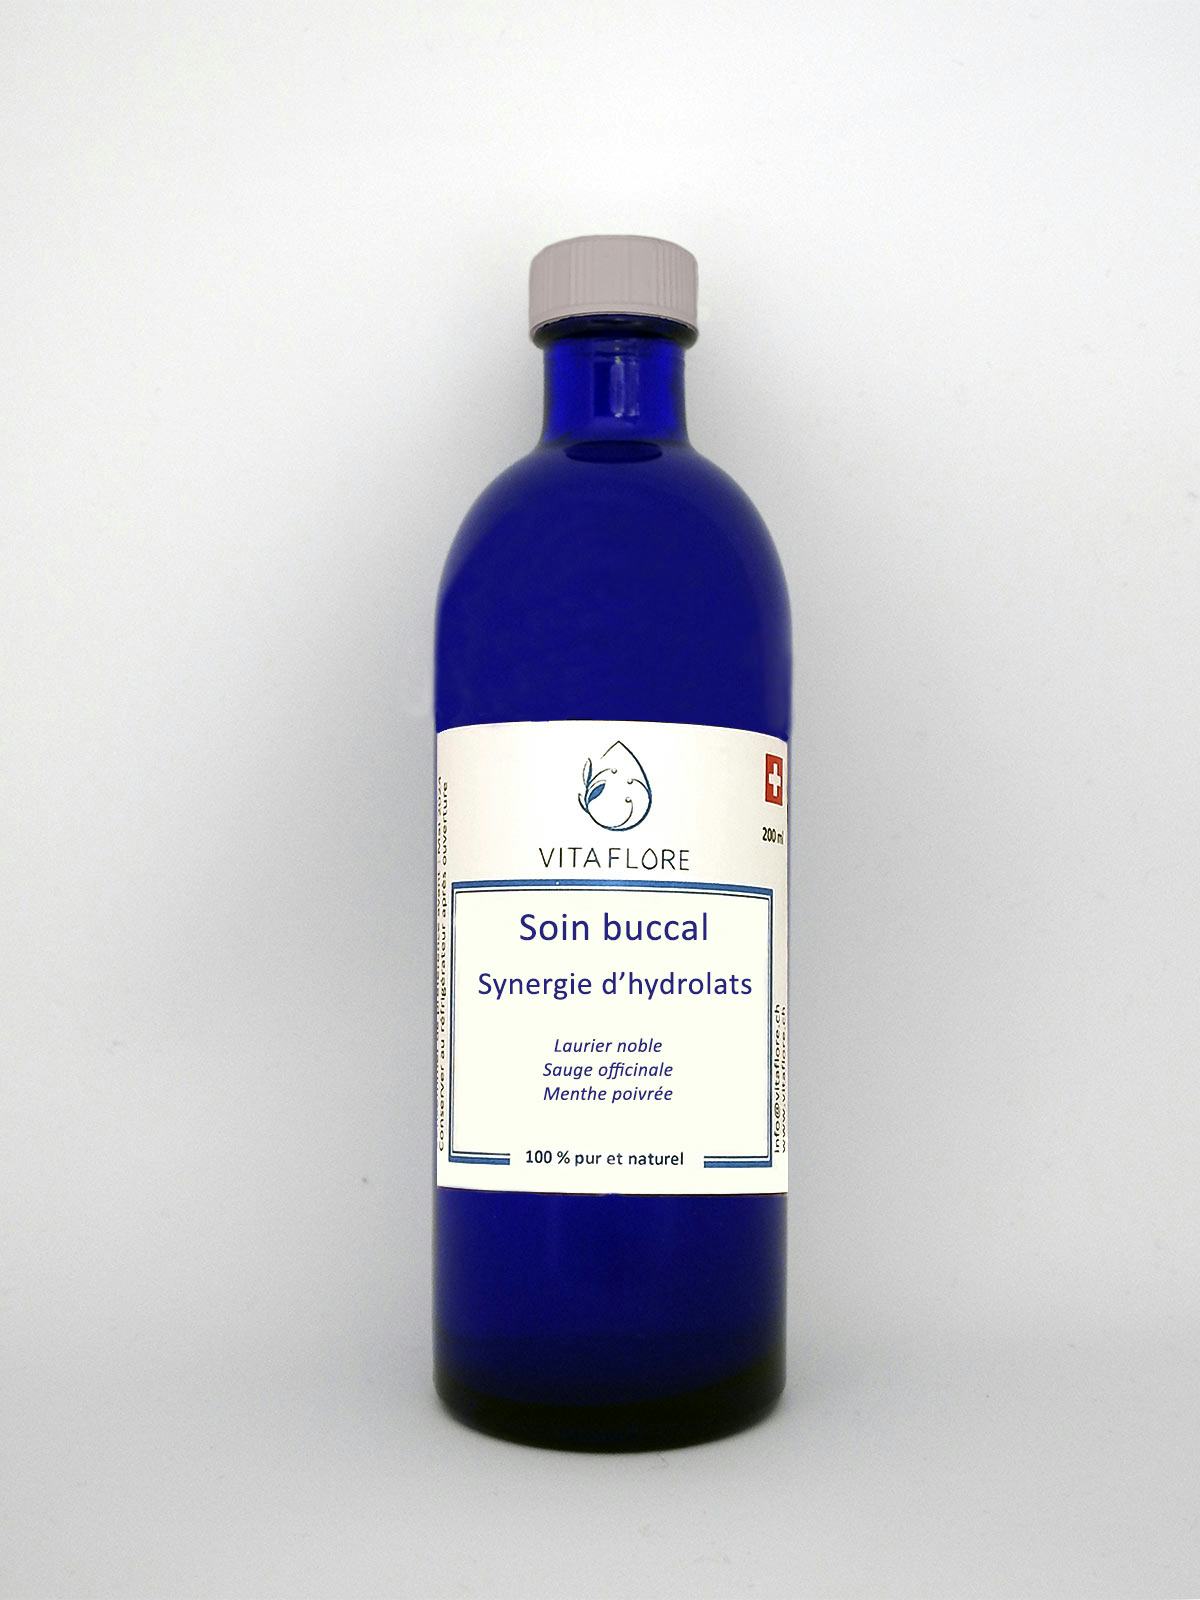 Synergie d’hydrolats – Soin buccal, artisanal product for direct sale in Switzerland